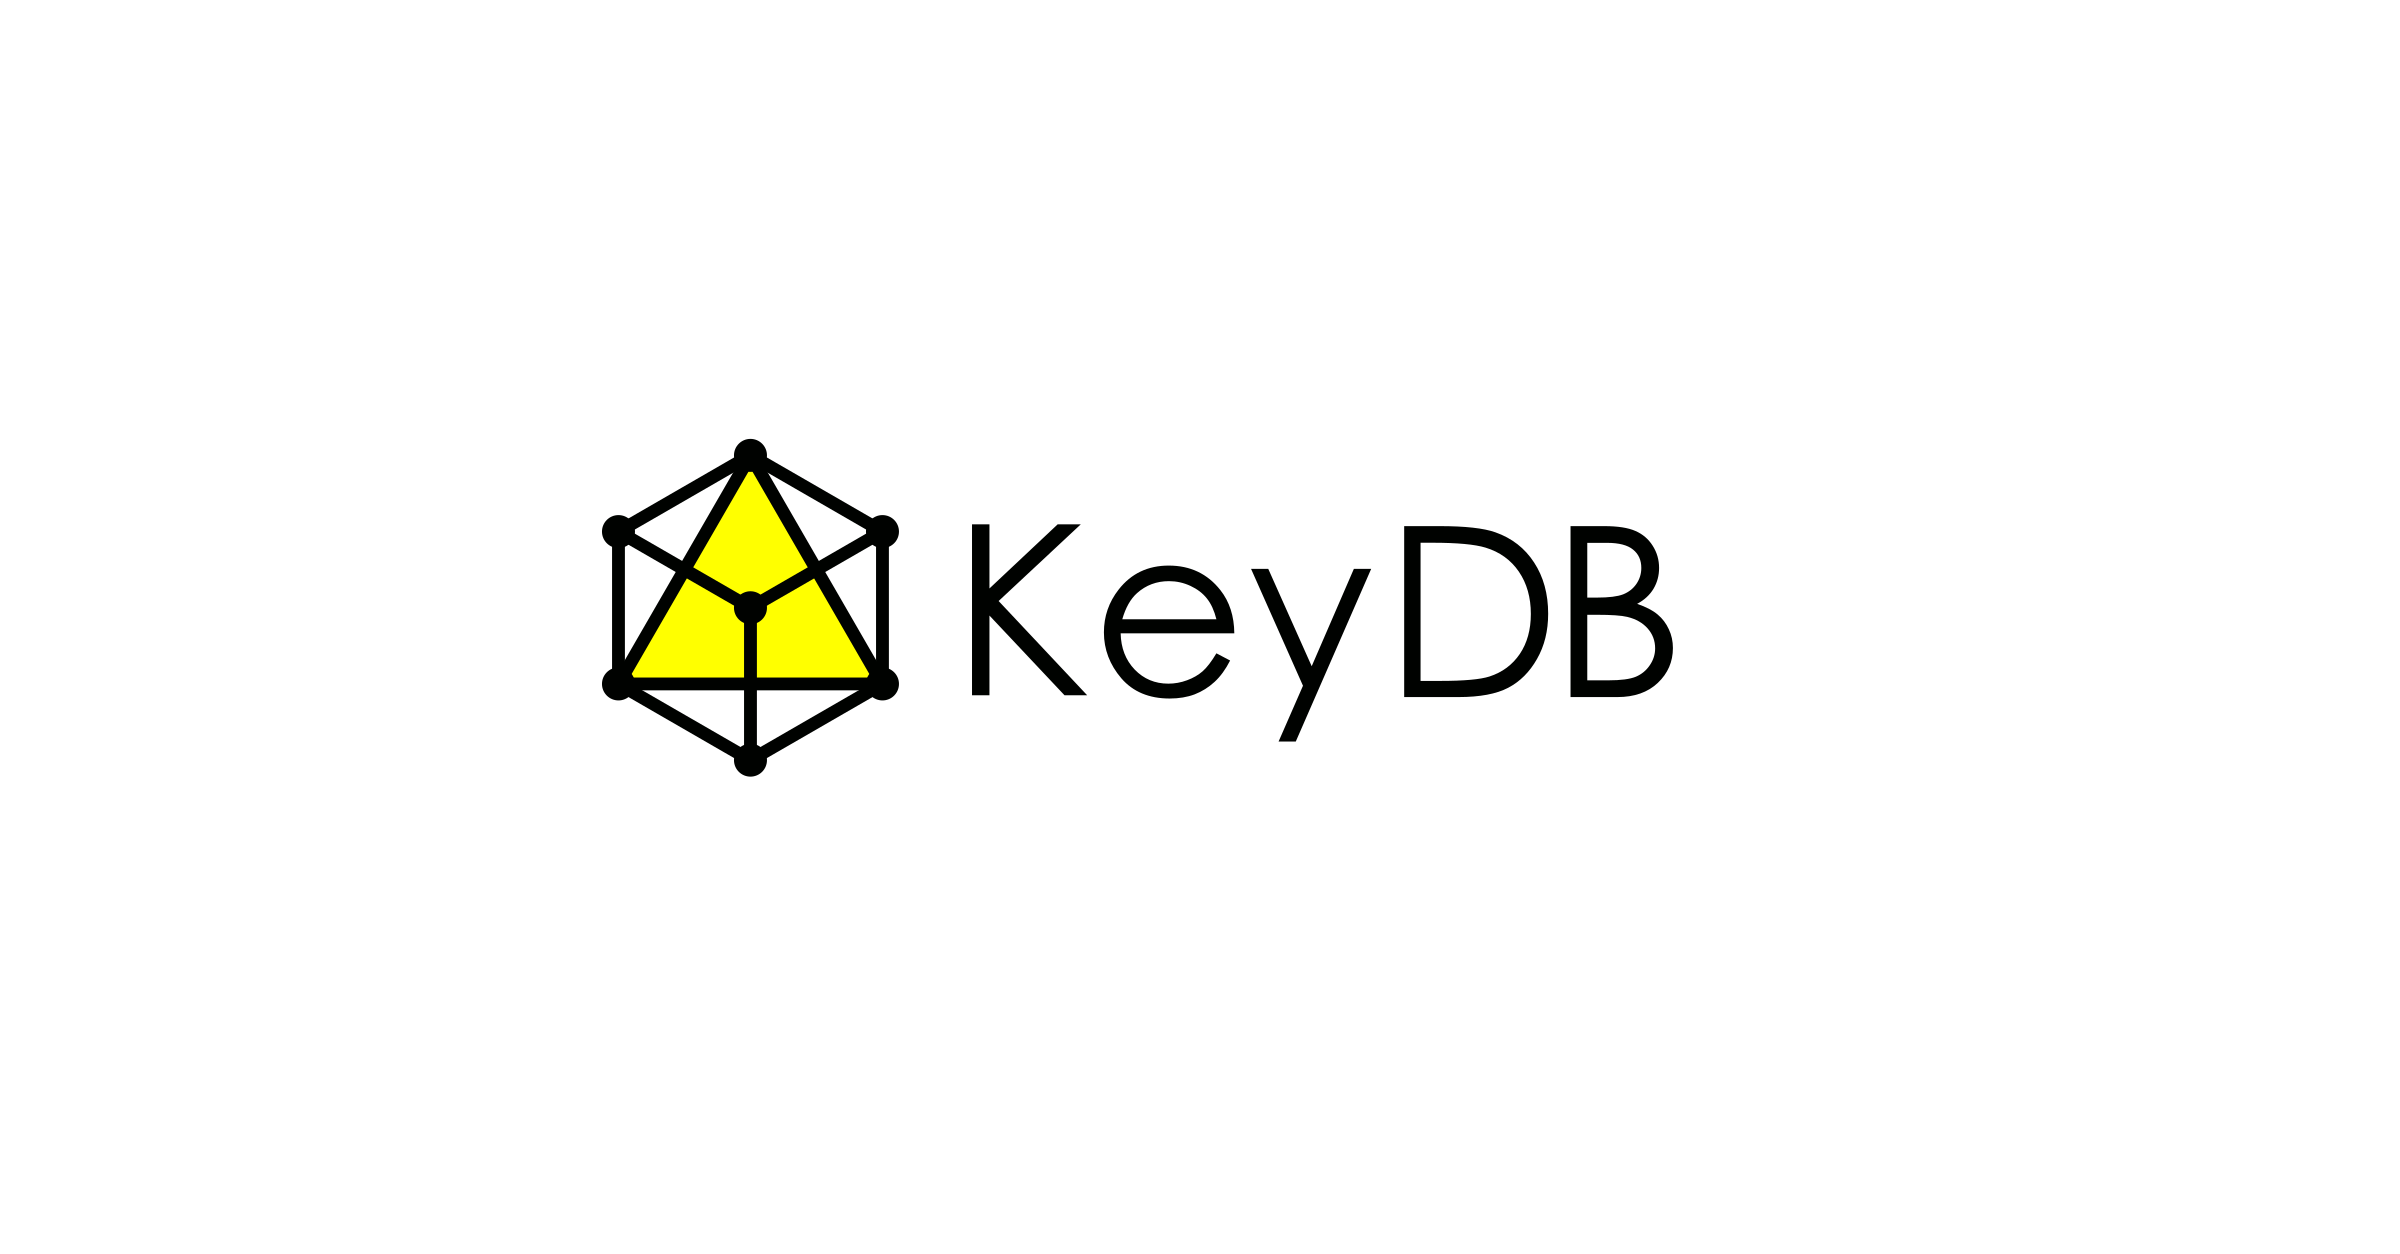  We're excited to announce that KeyDB is joining Snap! Not only does Snap provide a long-term home for KeyDB that shares our values, but this has